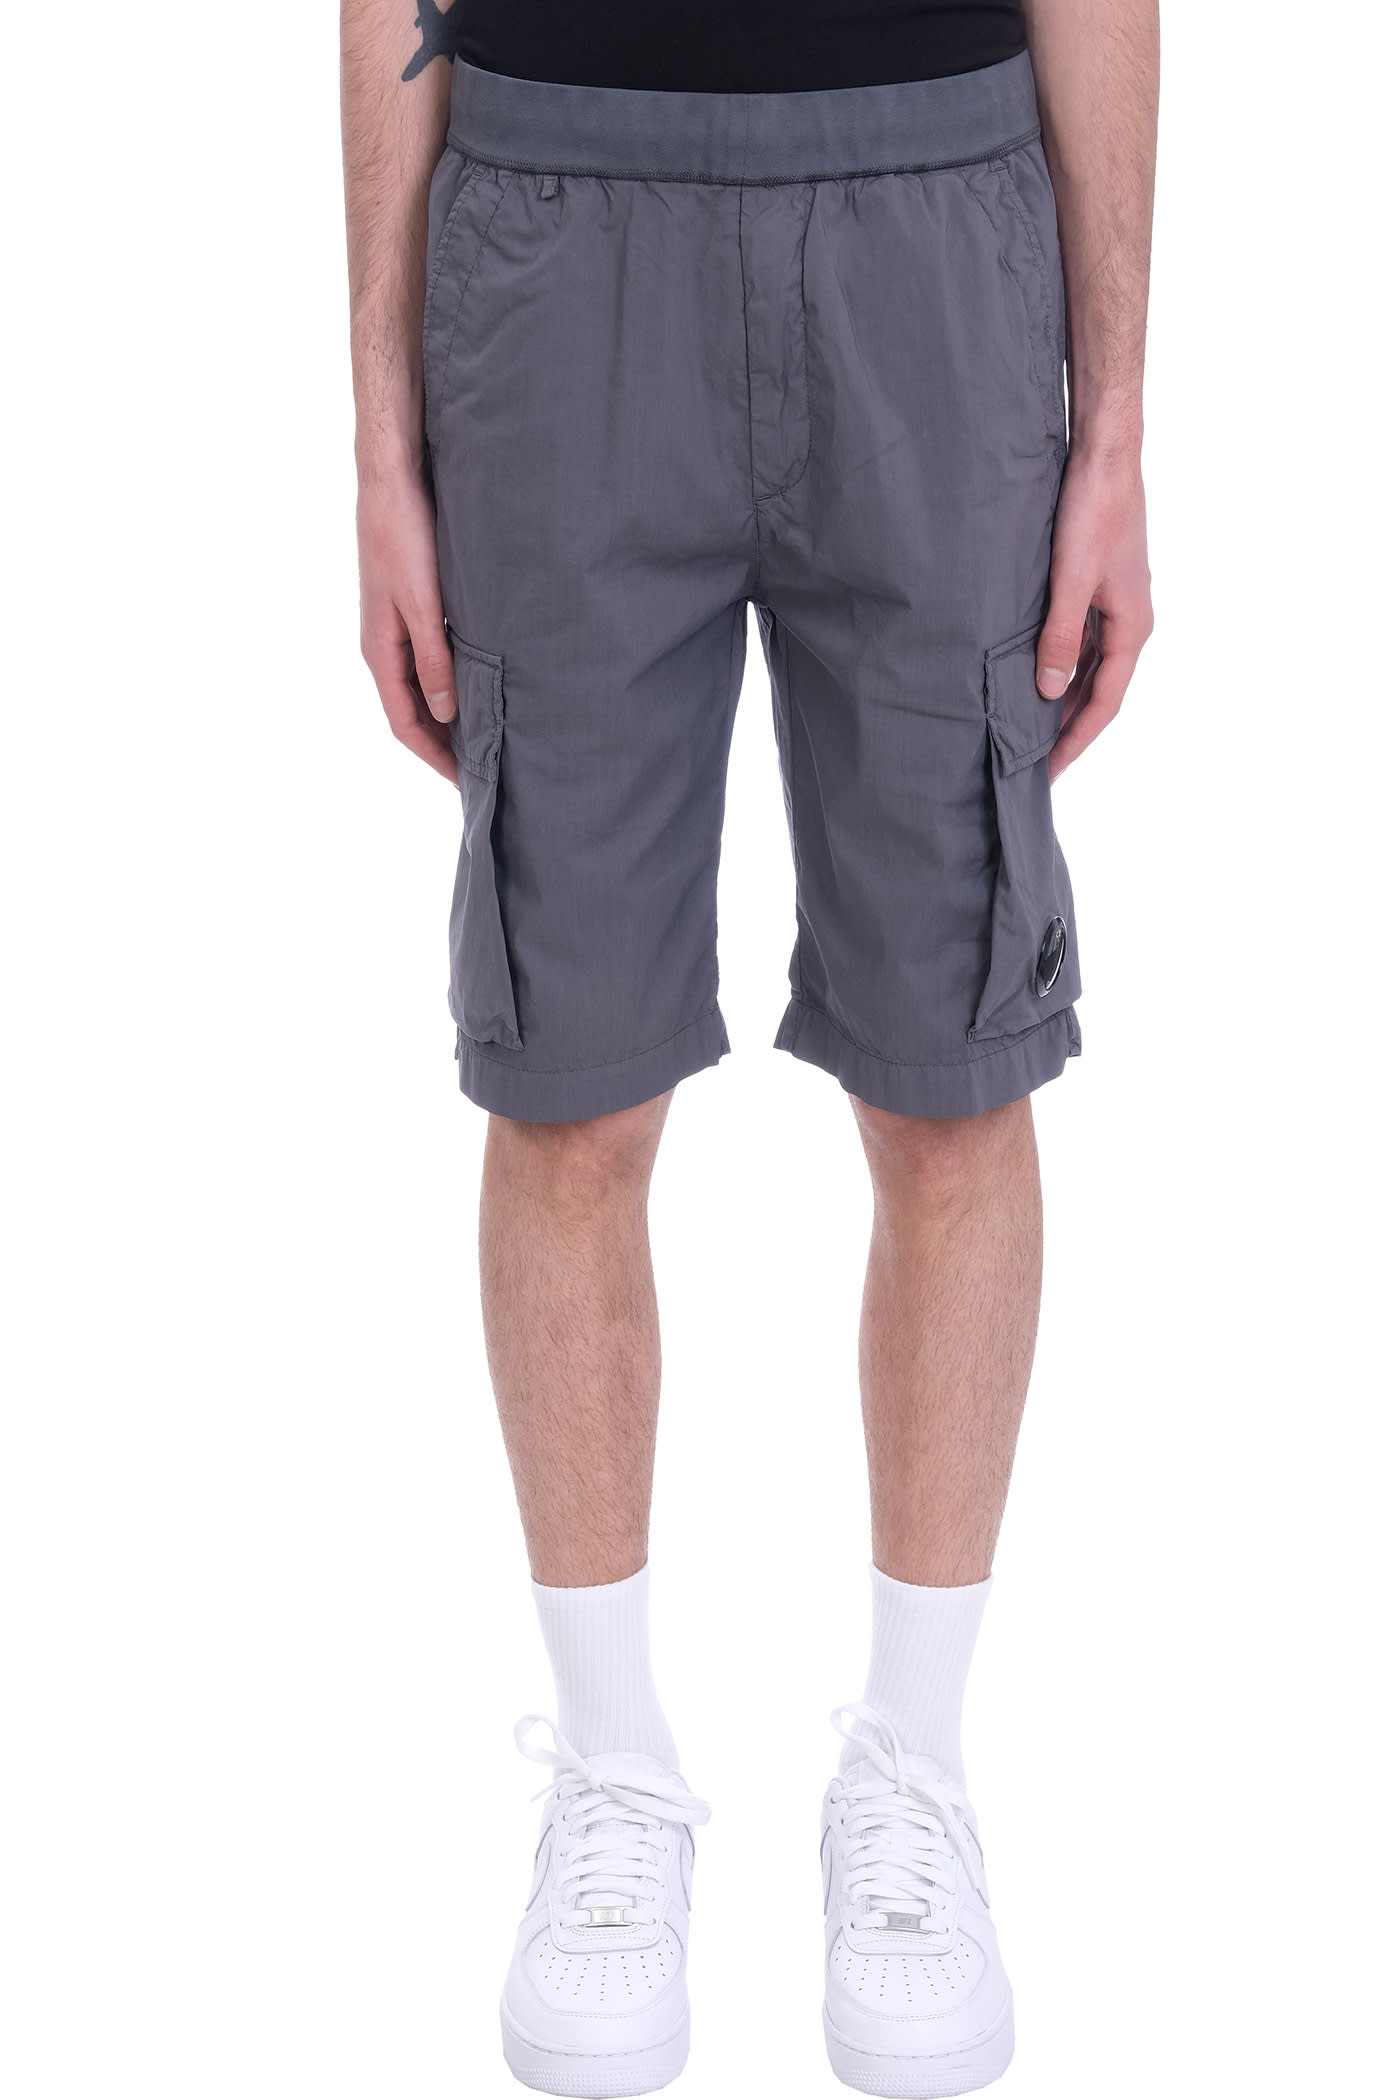 C.P. Company Shorts In Grey Cotton